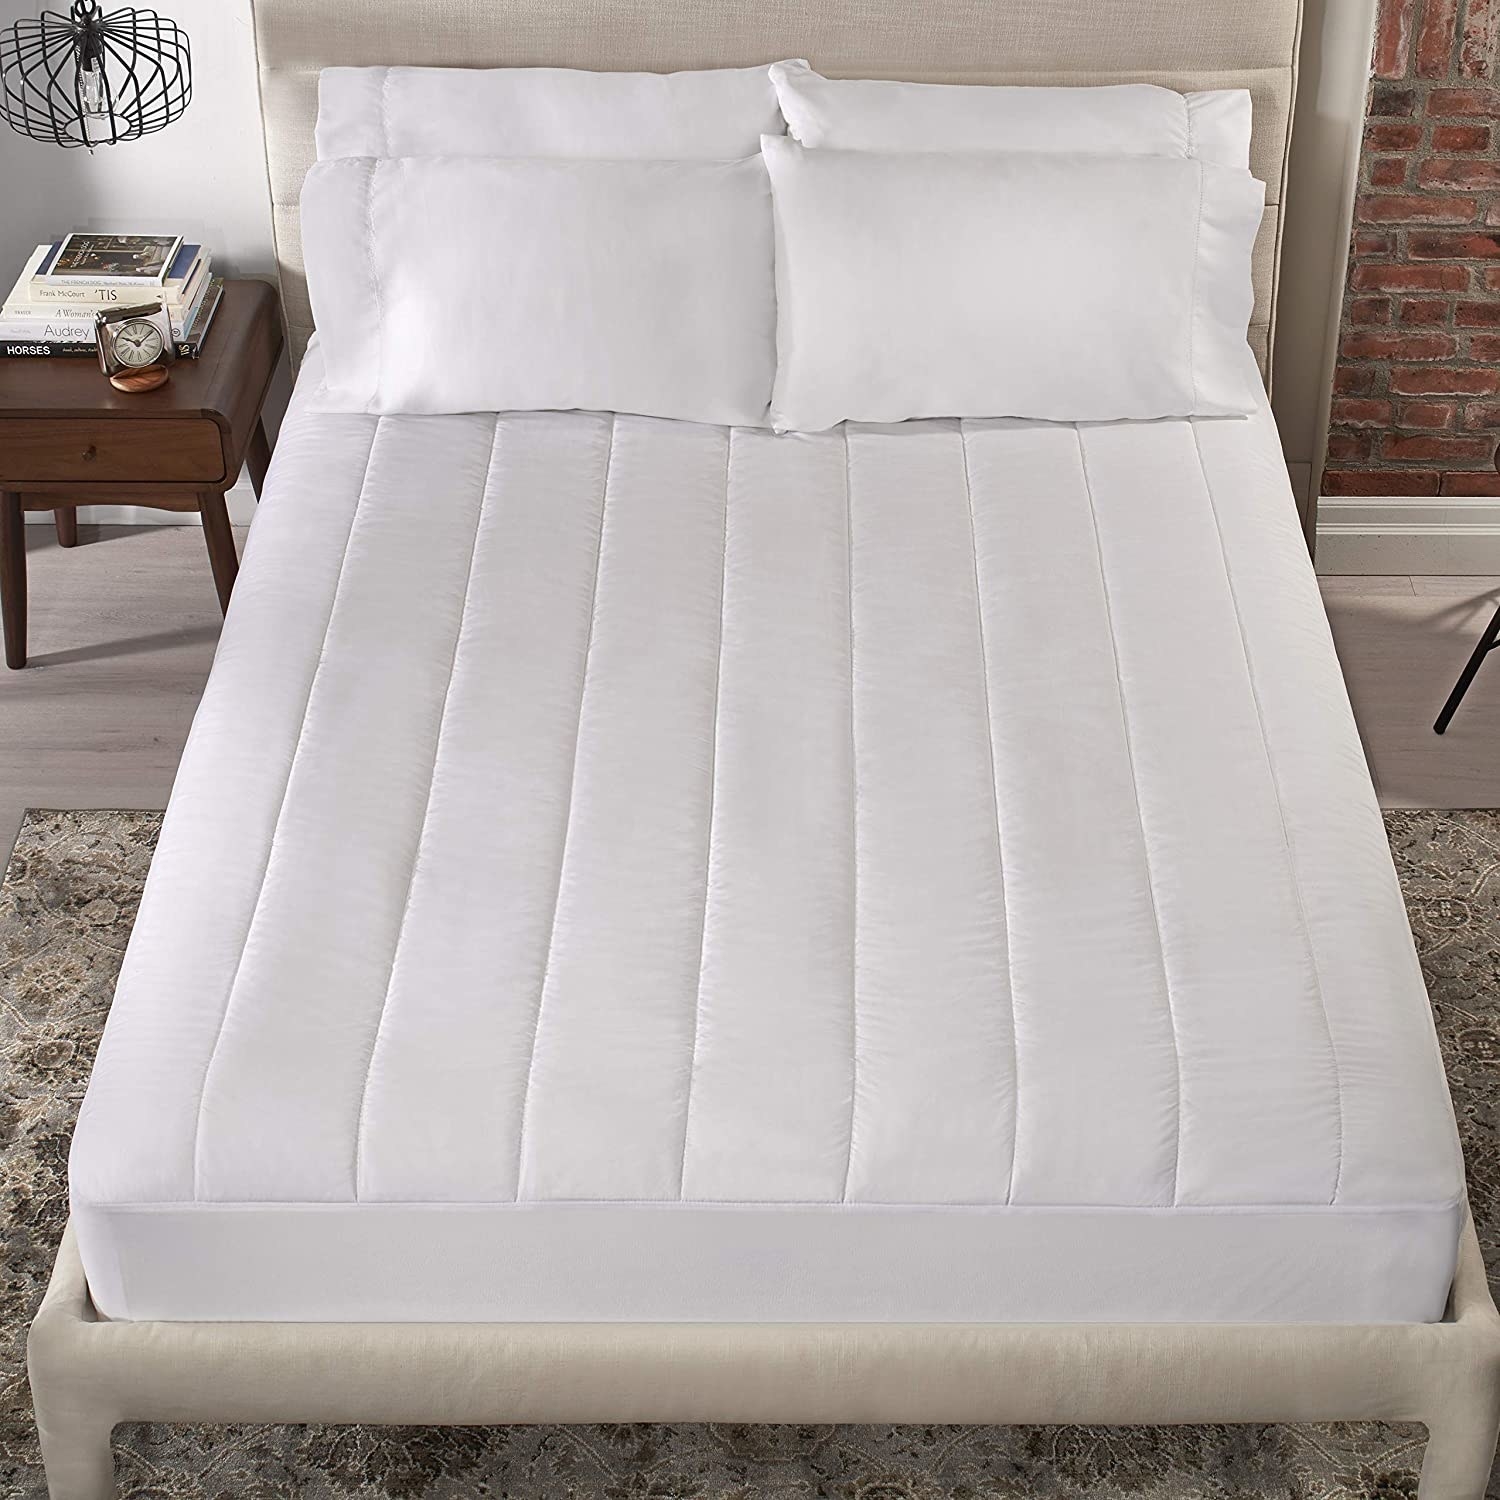 the quilted heated mattress pad on a bed